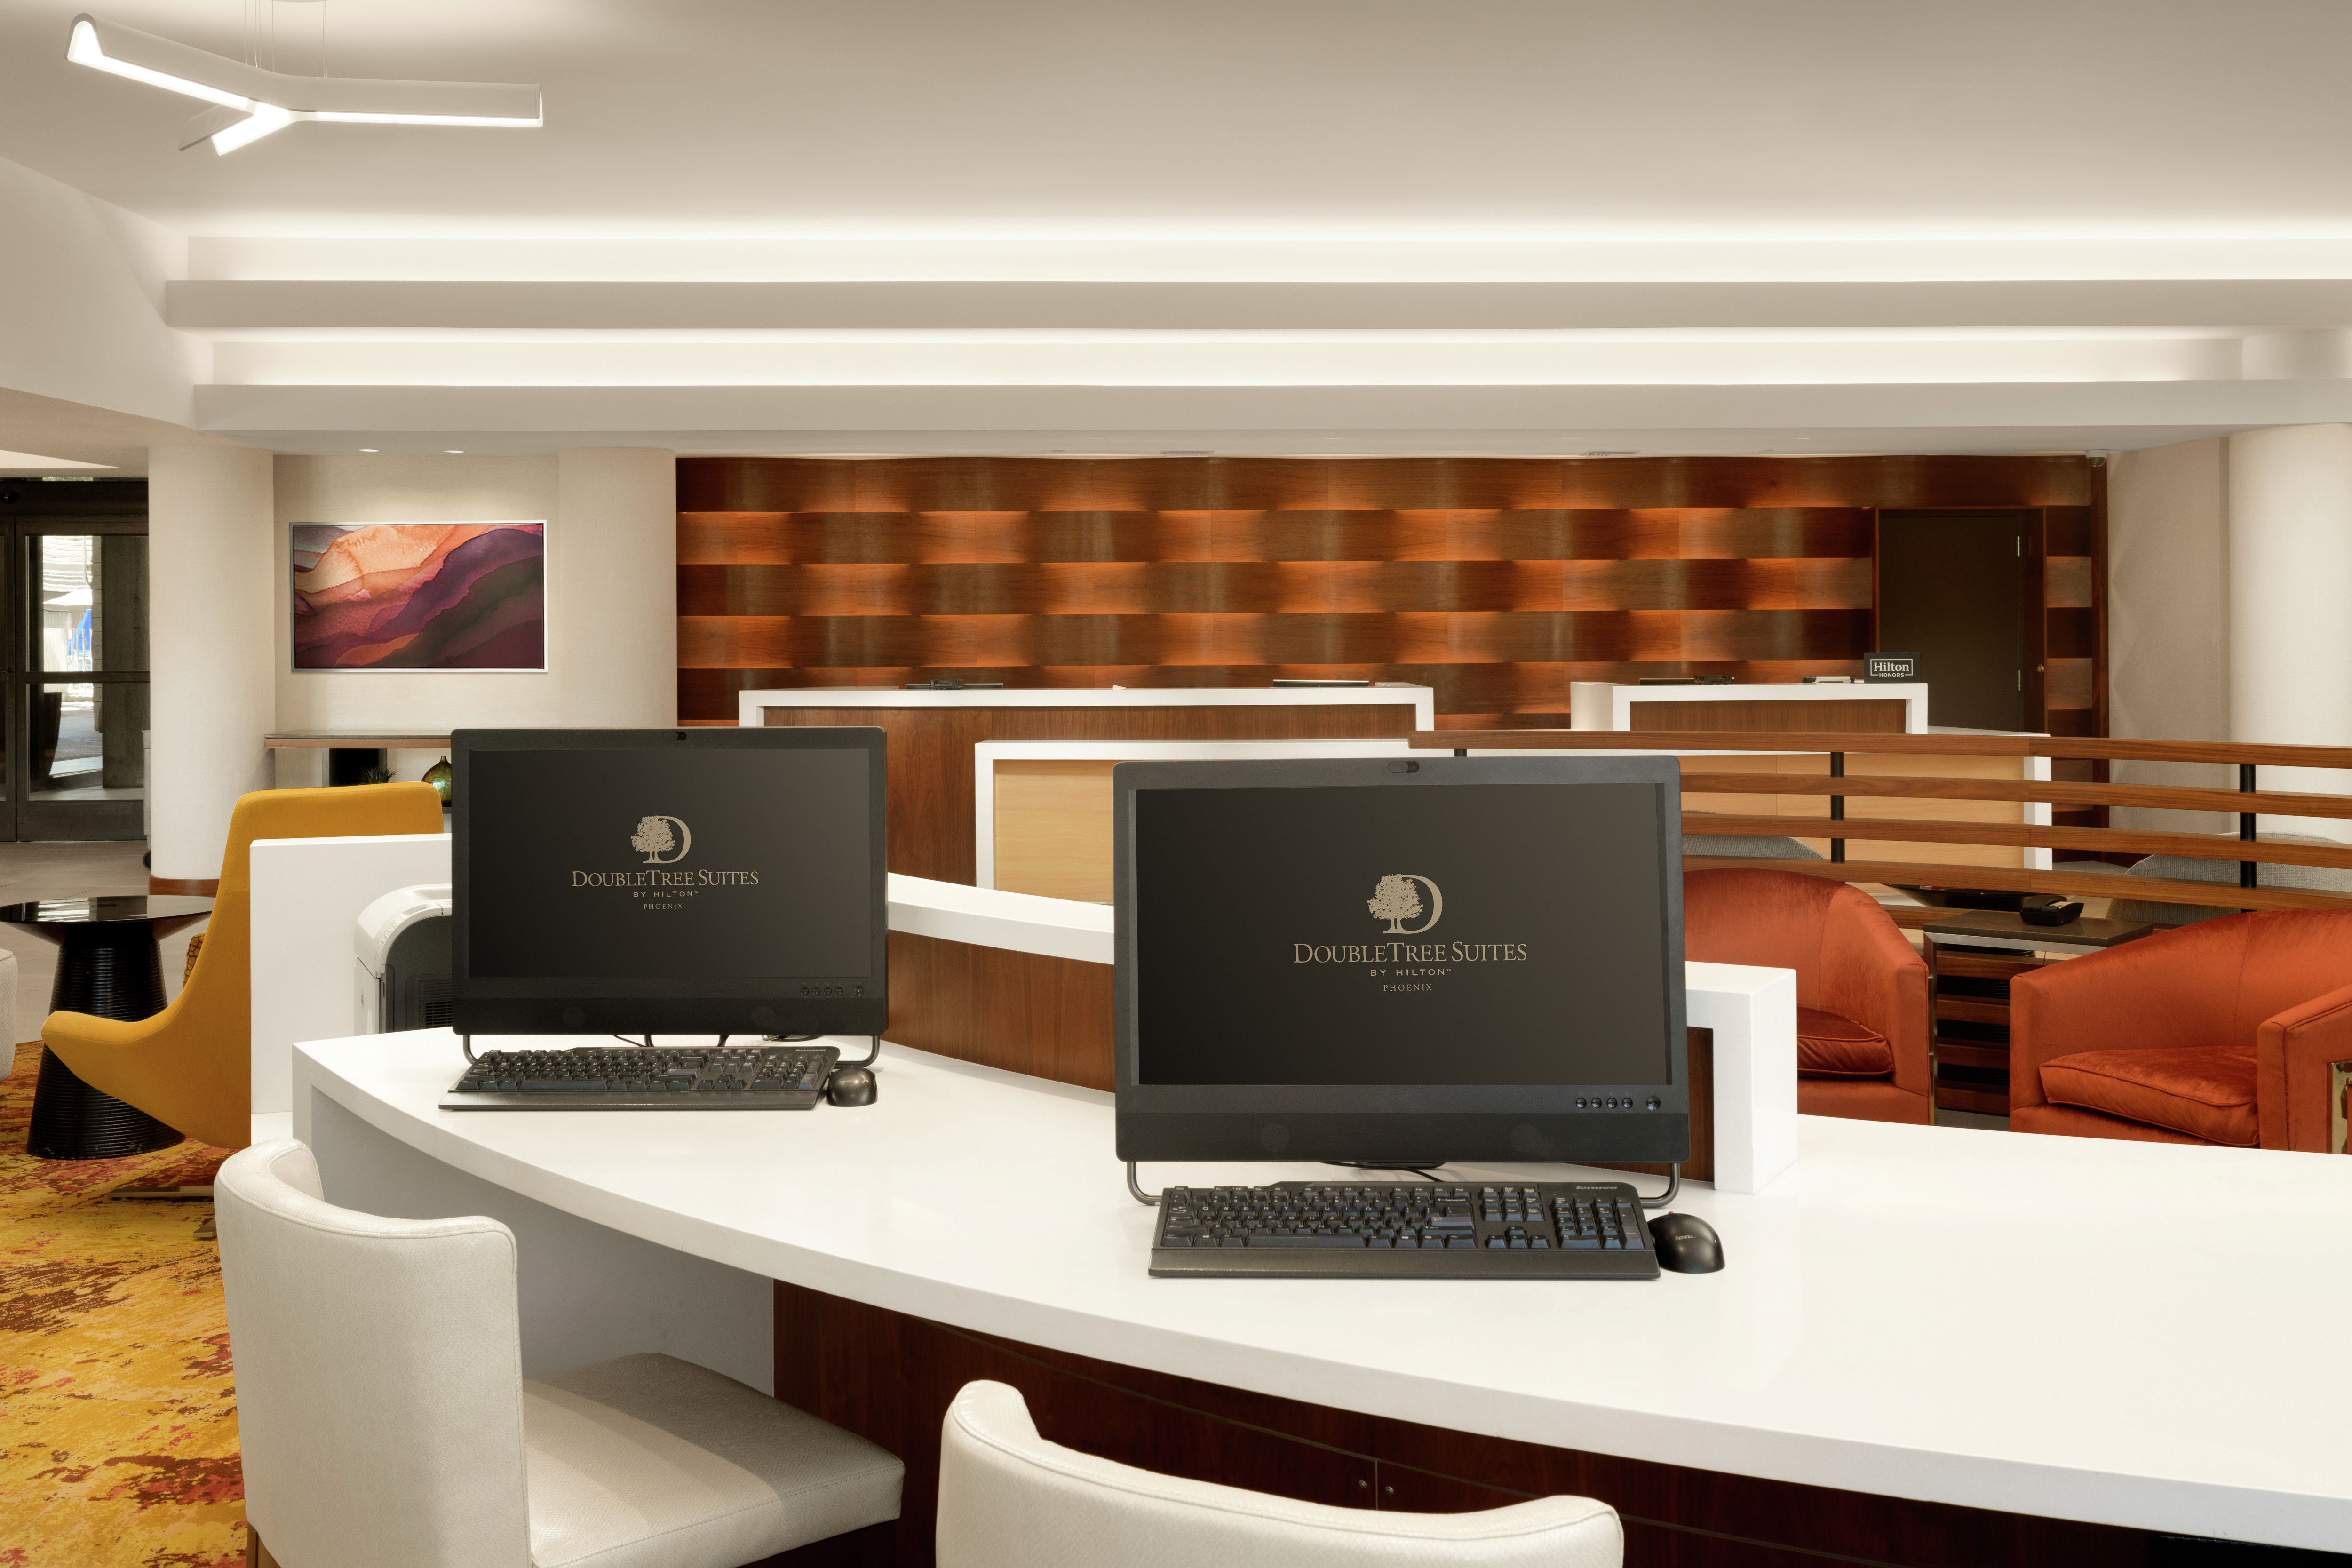 DoubleTree Lobby and Business Center with Room Technology